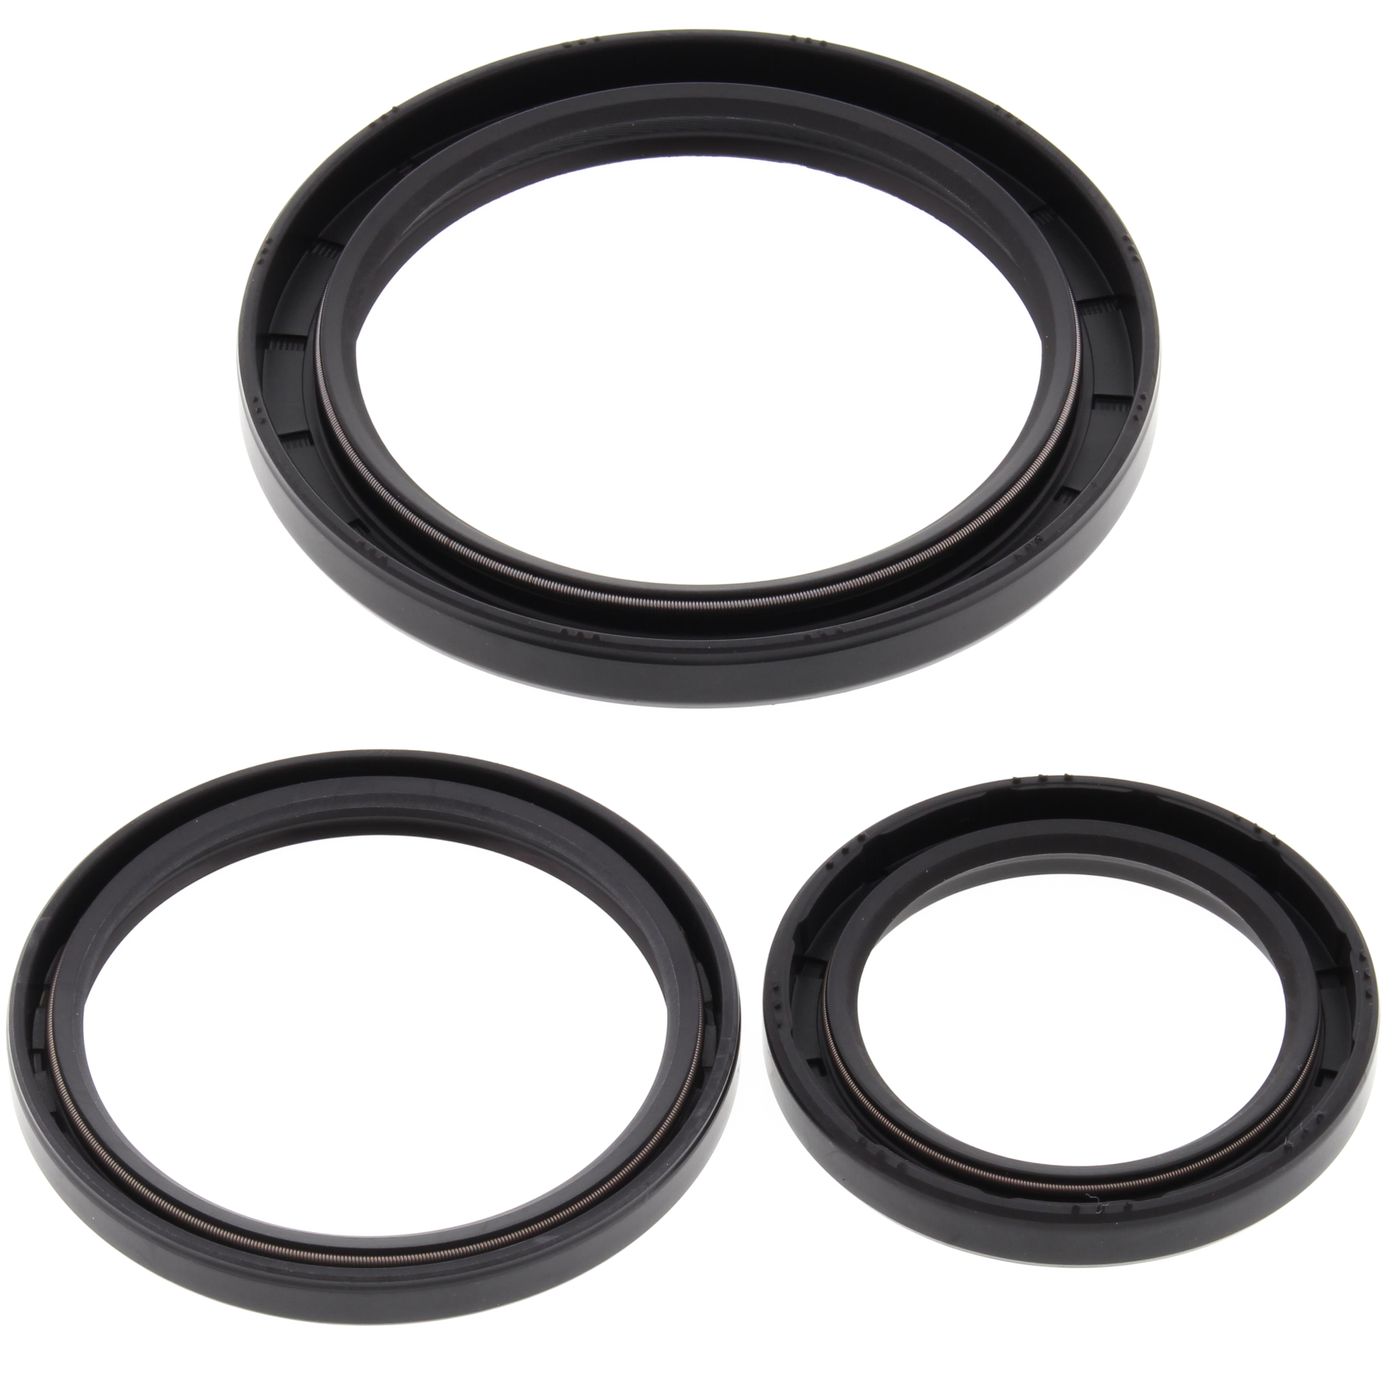 Wrp Diff Seal Kits - WRP252030-5 image